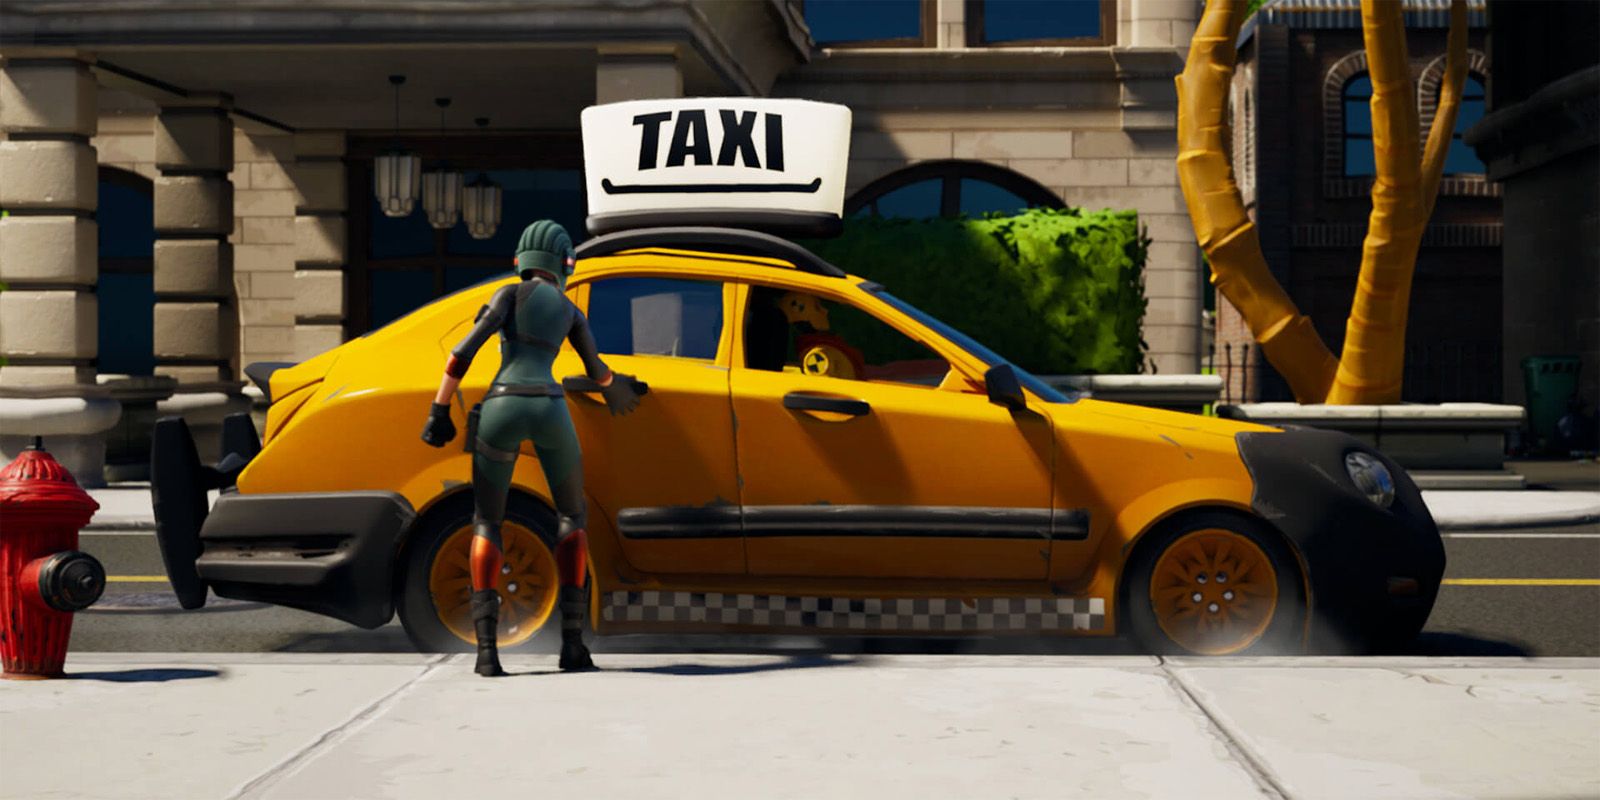 become taxi patreon code